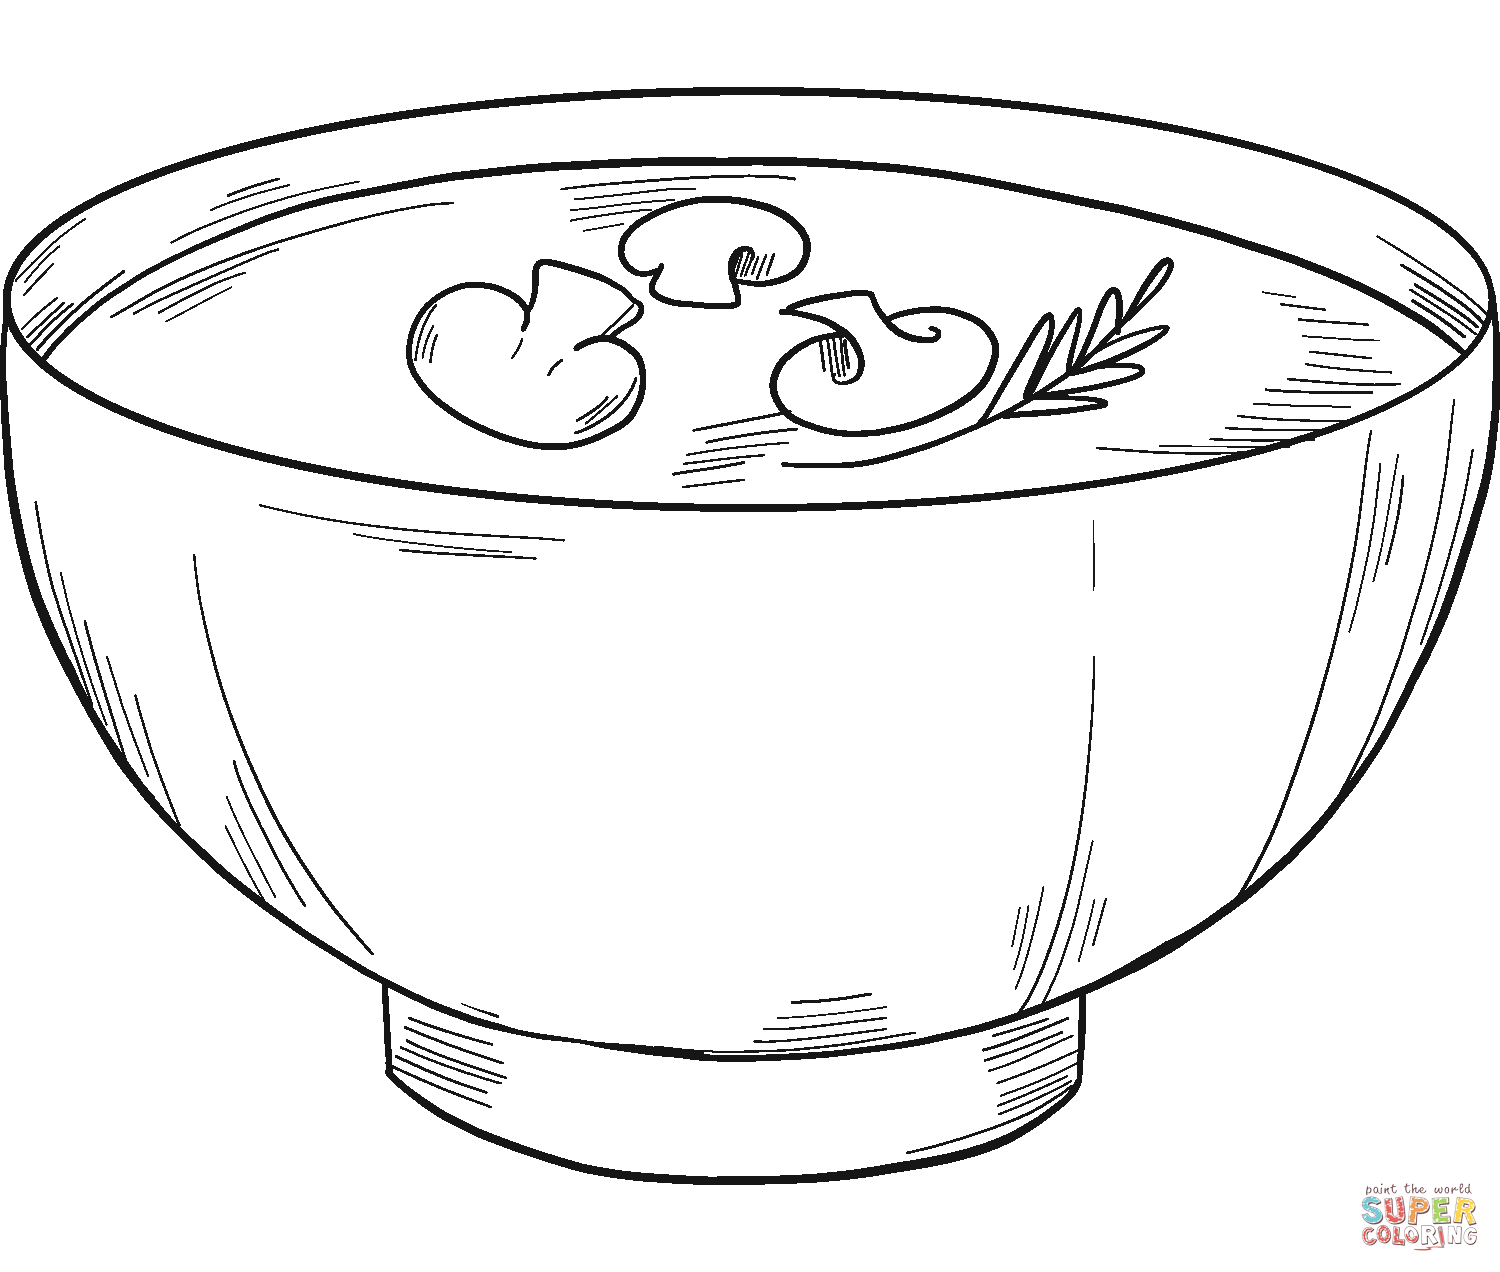 Bowl of soup for you